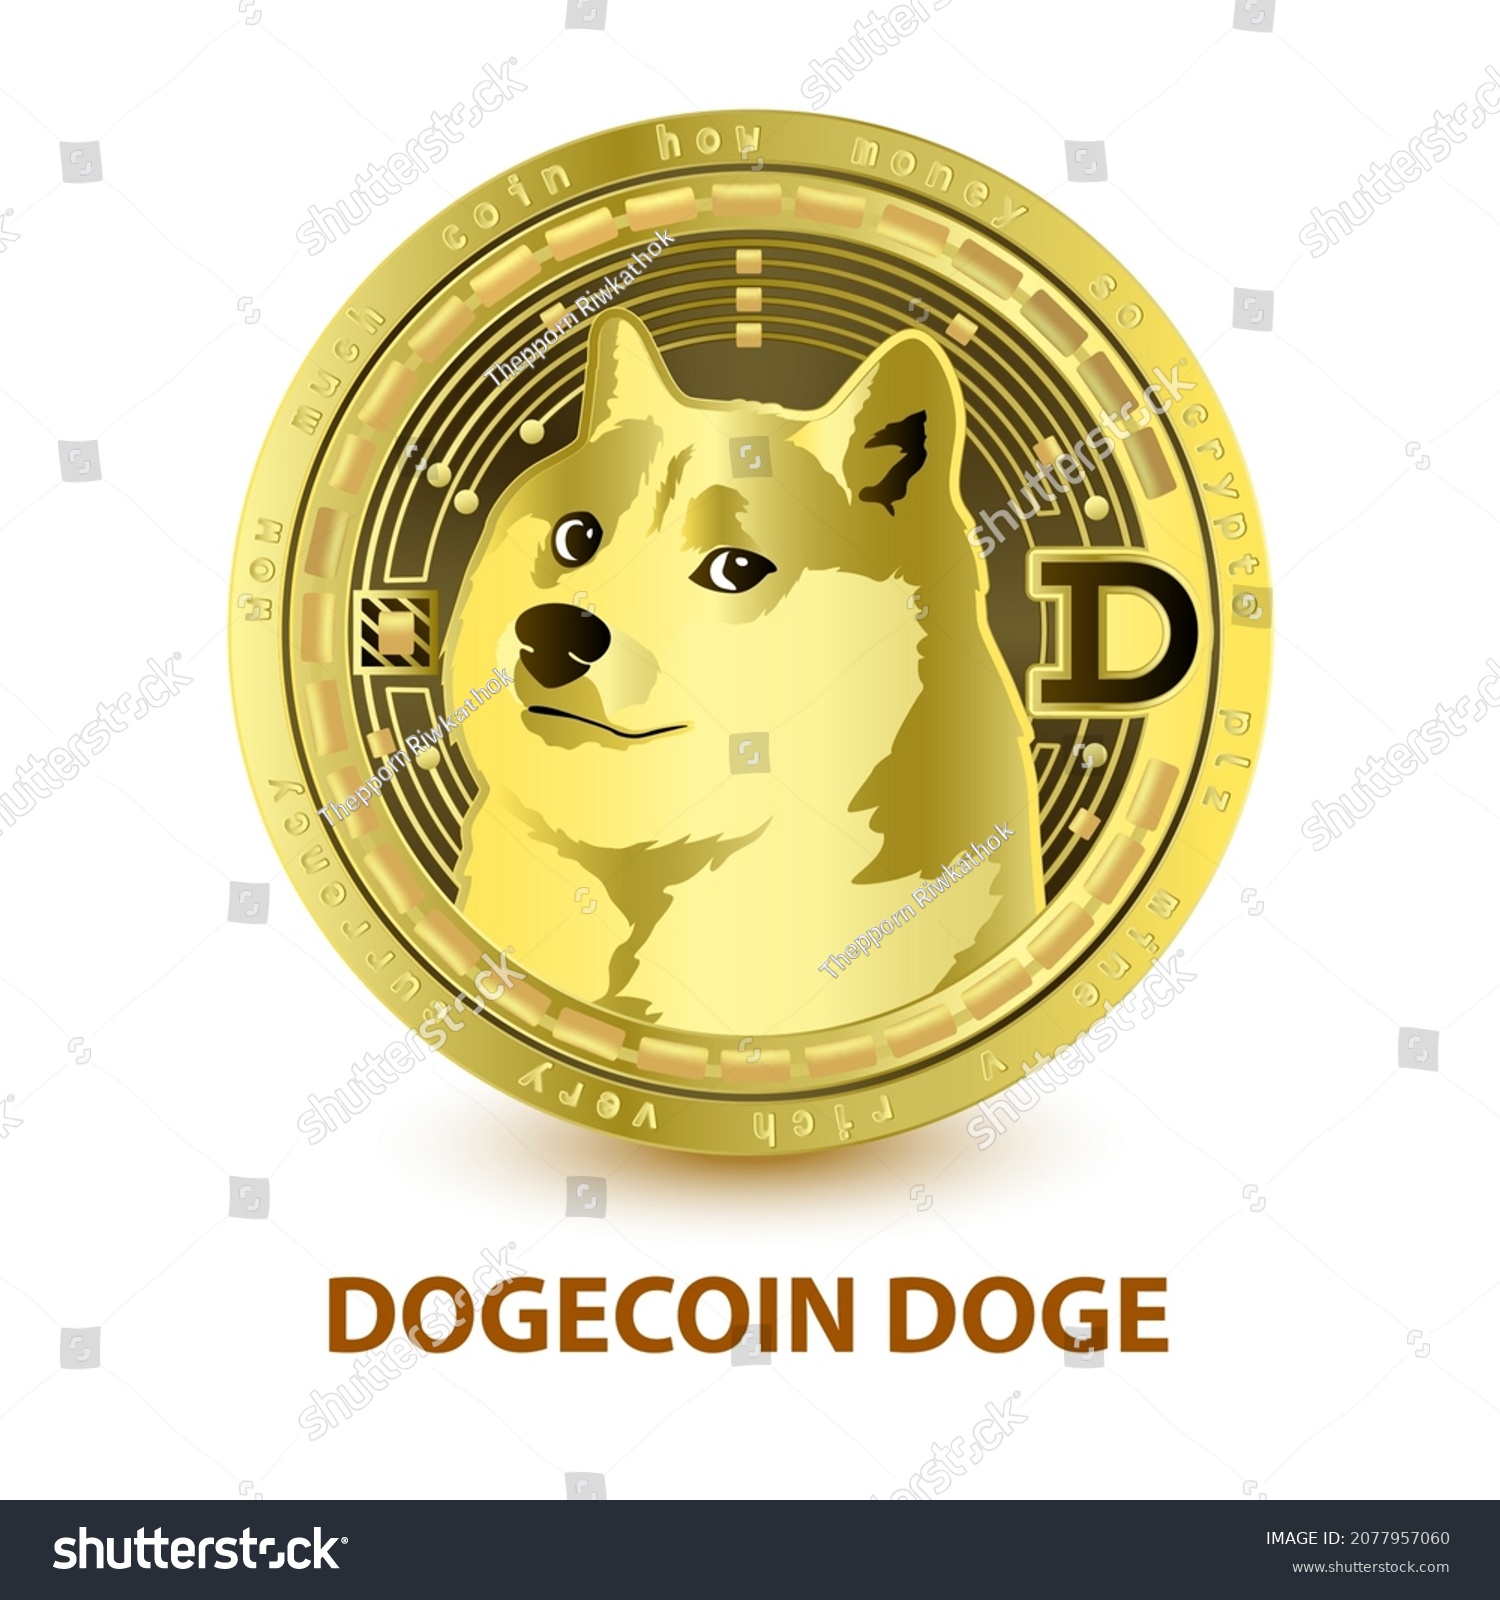 SVG of Dogecoin DOGE 3D Vector illustration Silver golden on white background. Coins cryptocurrency blockchain (crypto currency) digital currency, alternative currency. Future currency replacement technology svg